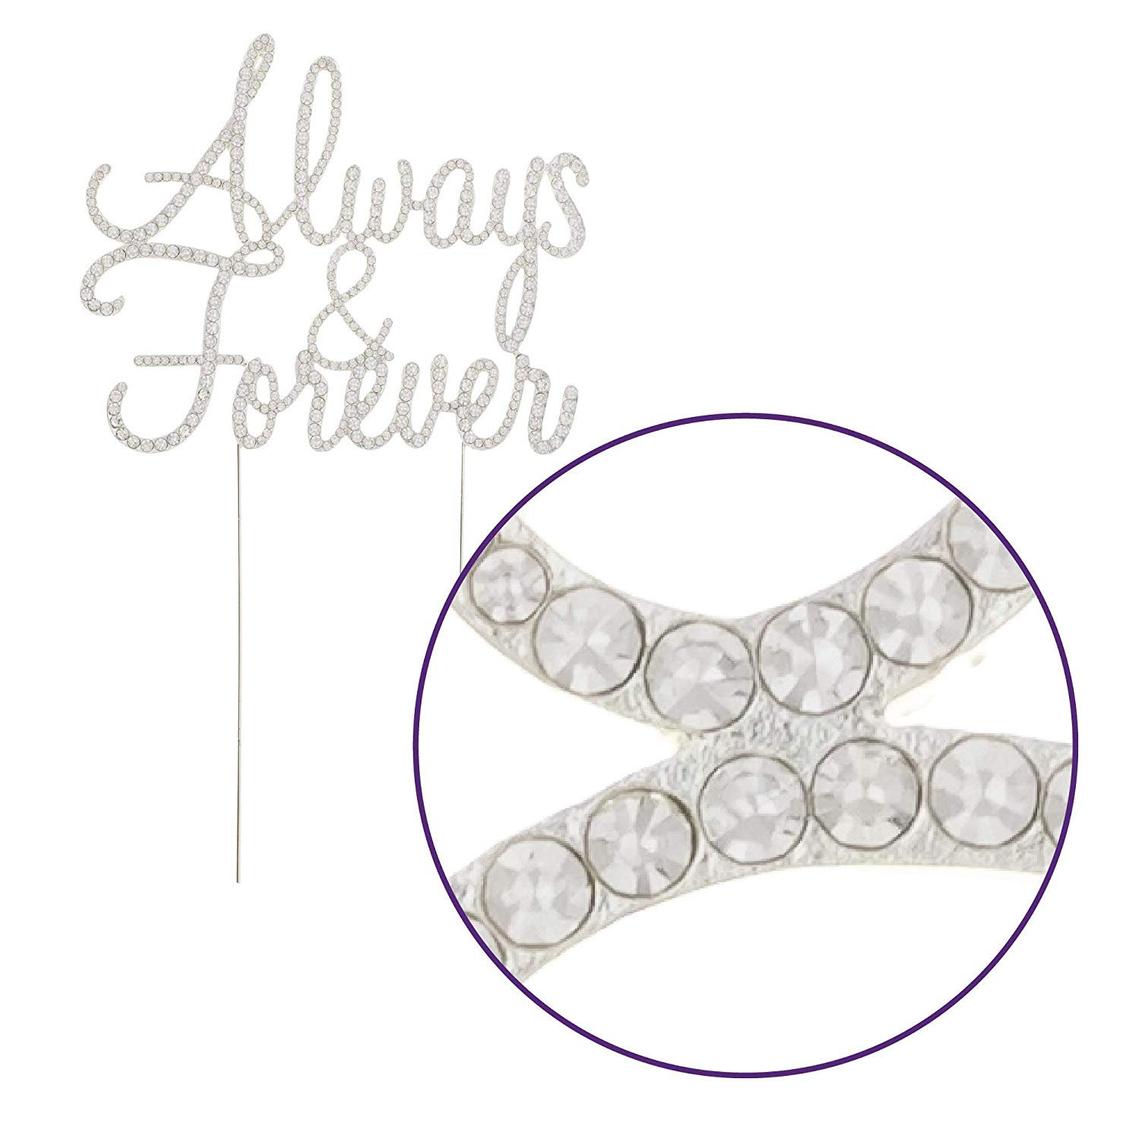 Always and Forever Wedding Cake Topper, Silver Decoration, Engagement Party, Bridal Shower, Romantic Toppers Supplies Party Decorations